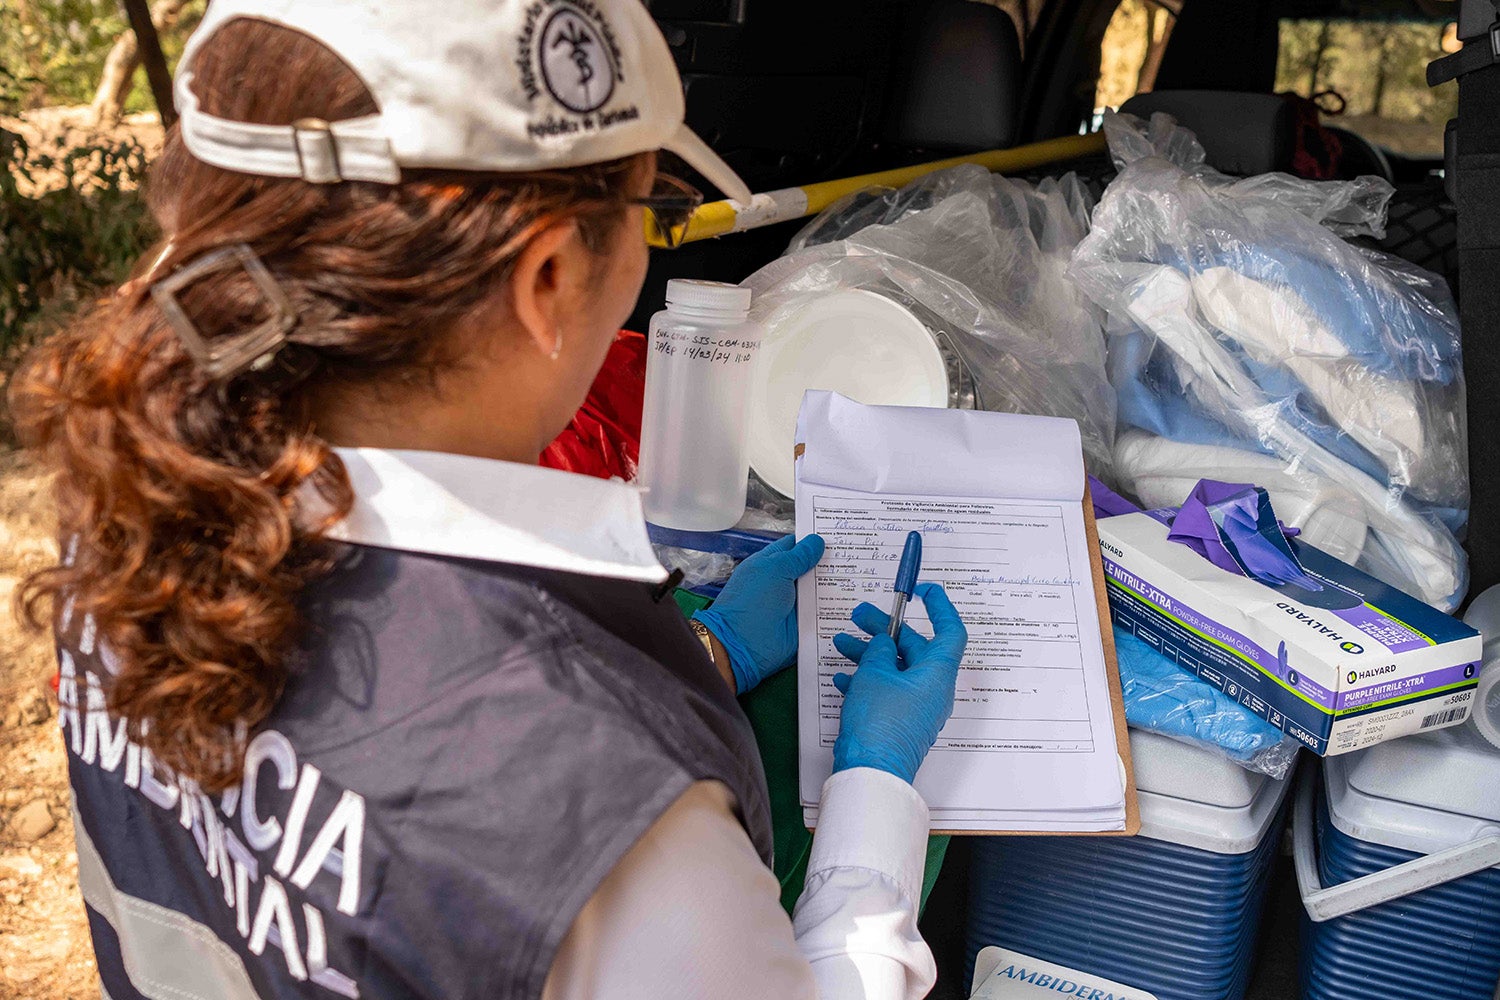 Completing the wastewater sample collection form at one of the sampling sites, San Juan Sacatepéquez, Guatemala.